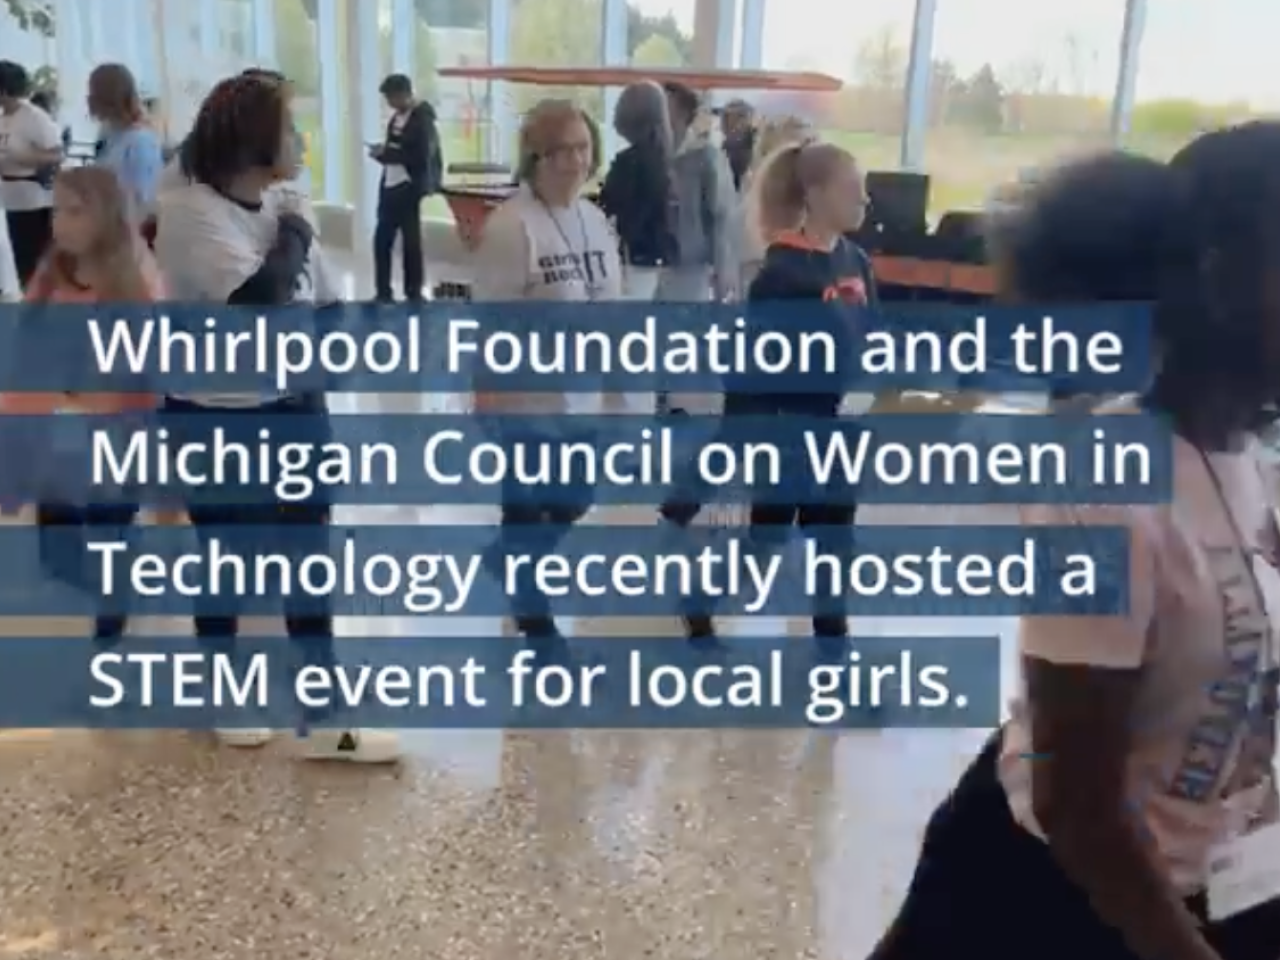 "Whirlpool Foundation and the Michigan Council on Women in Technology recently hosted a STEM event for local girls."